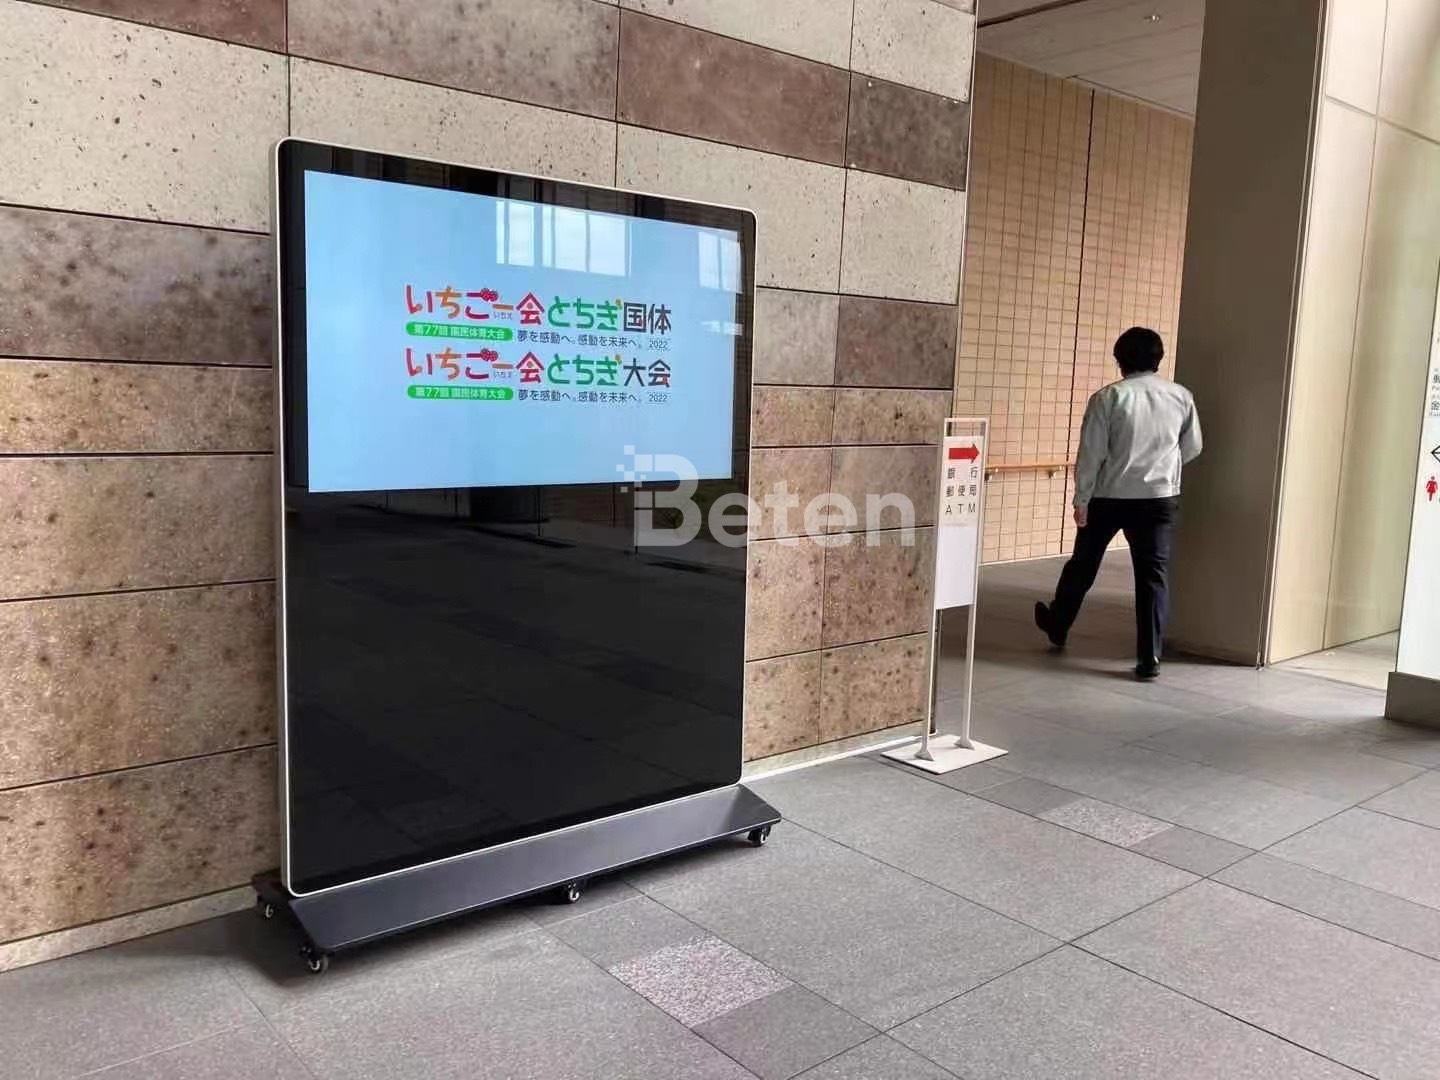 Beten Digital Signages are deployed in Japan -8